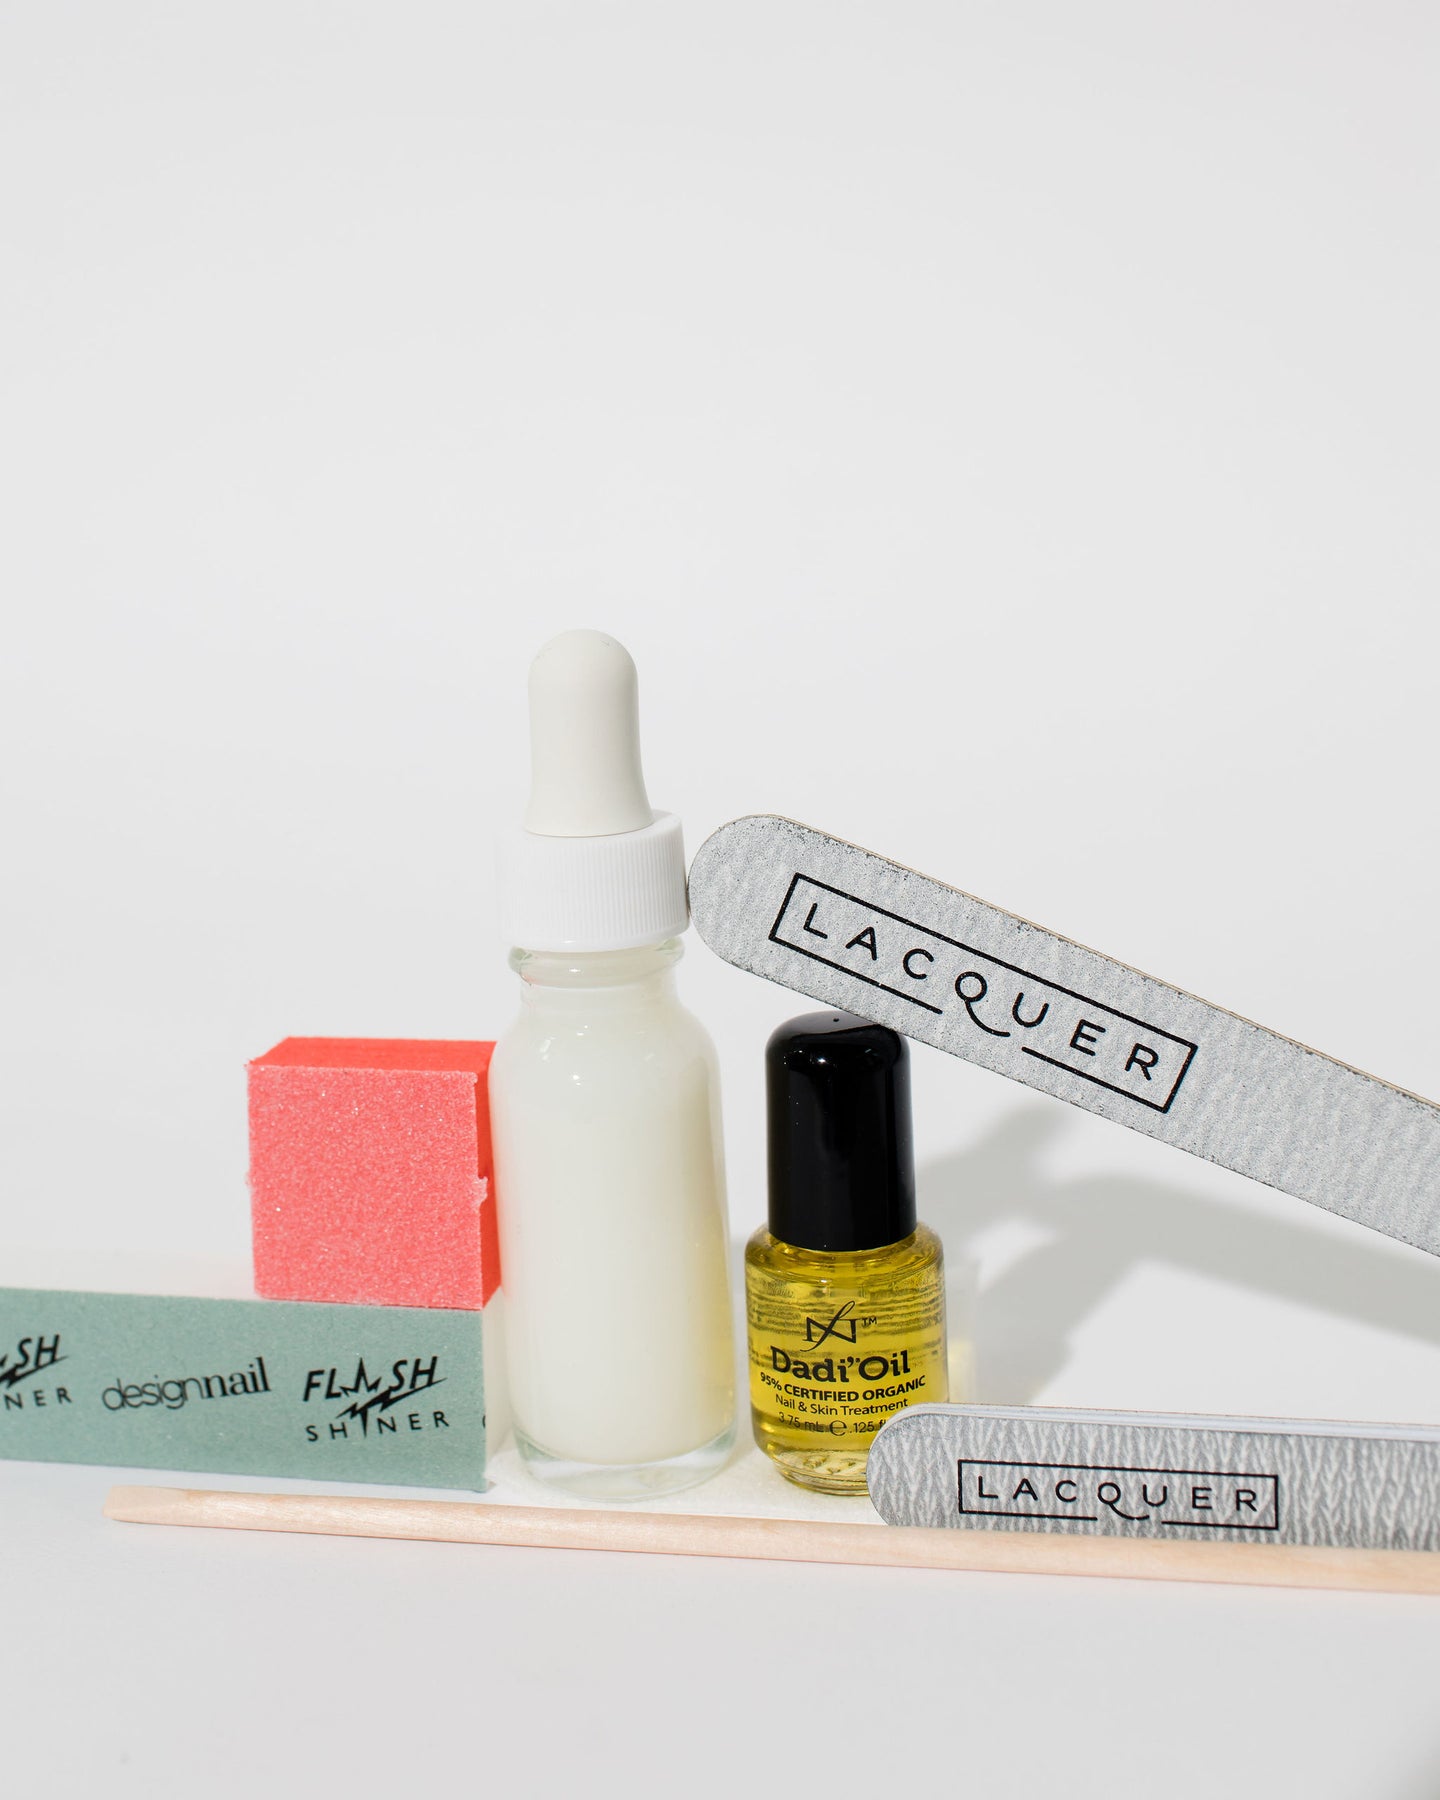 LACQUER At Home Manicure Kit